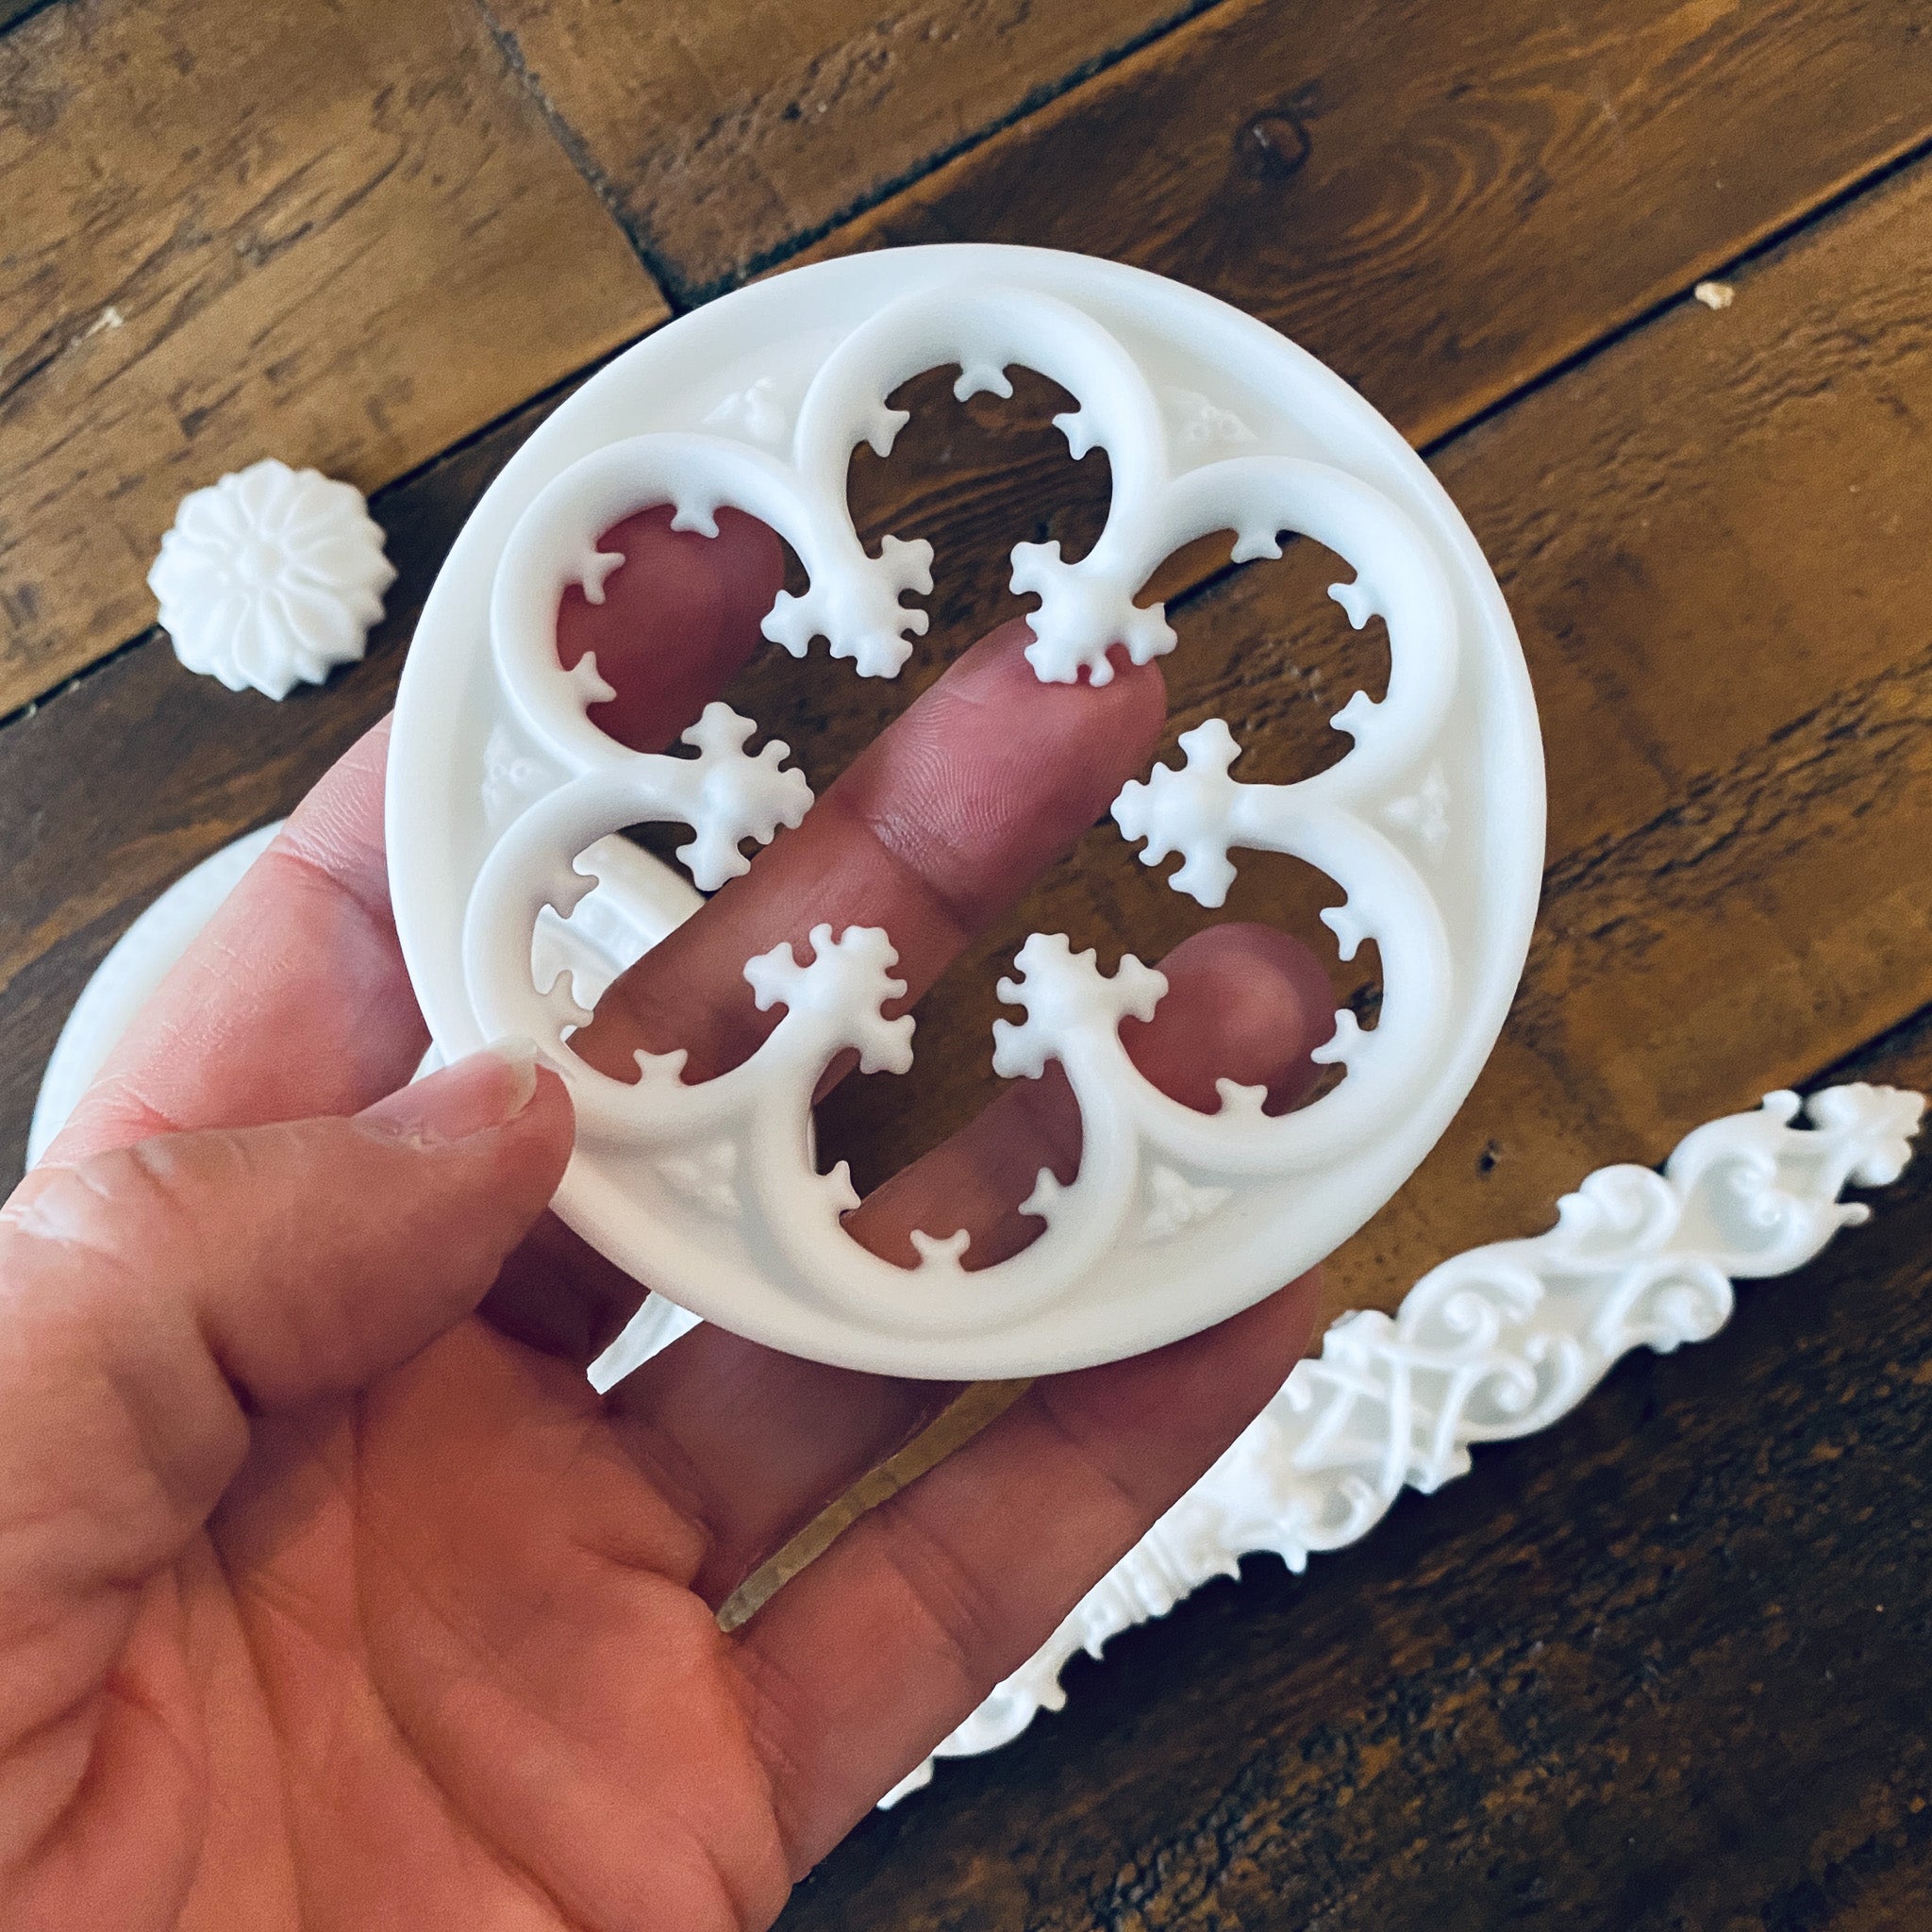 White resin castings of 2 round ornate accent pieces, 2 small round flowers, and a long ornate rod accent piece are against a wood background. A hand is holding one of the larger castings.